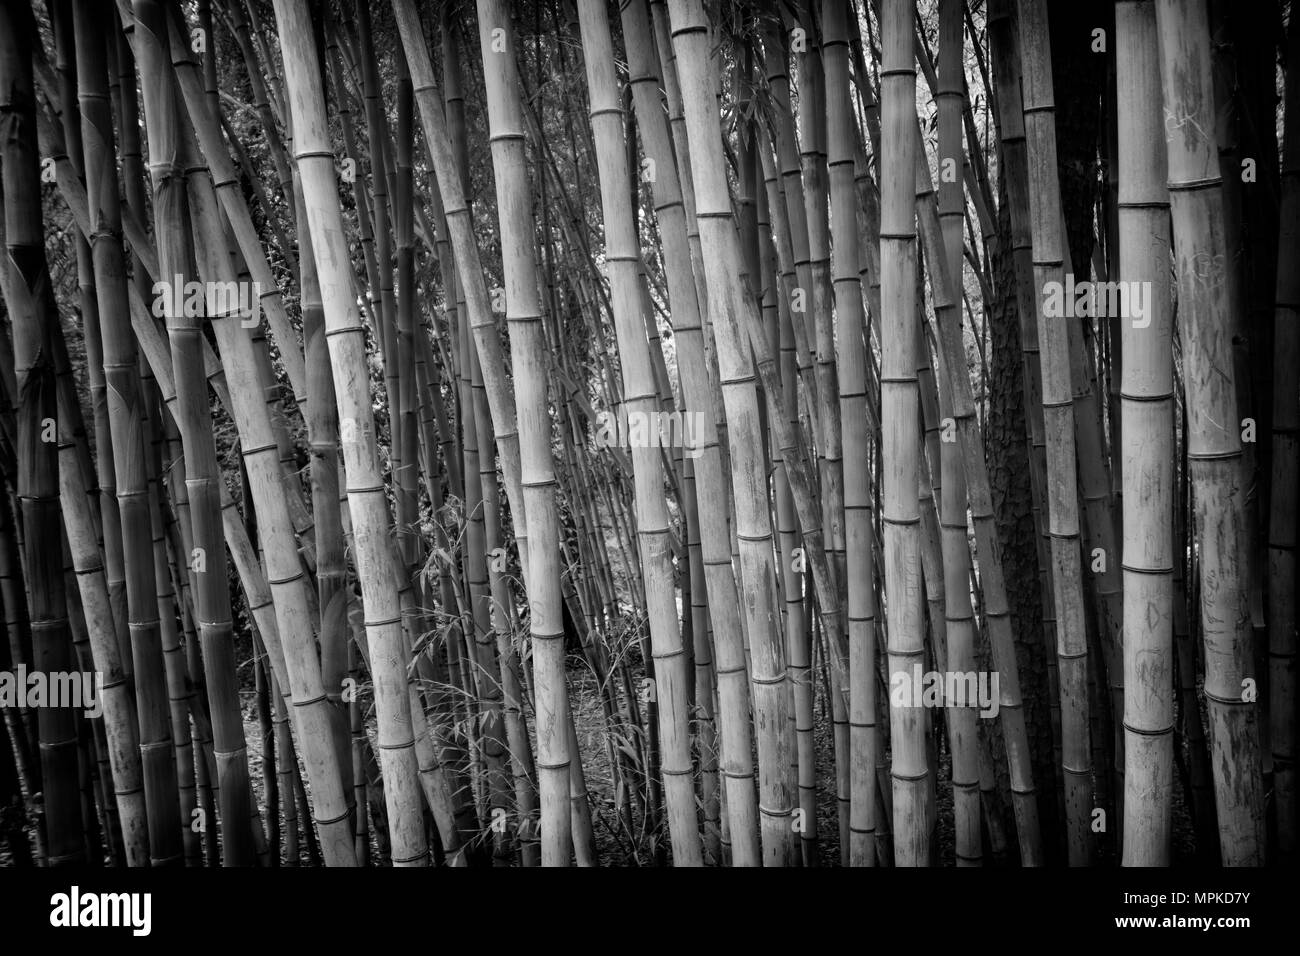 Bamboo in garden Black and White Stock Photos & Images - Alamy